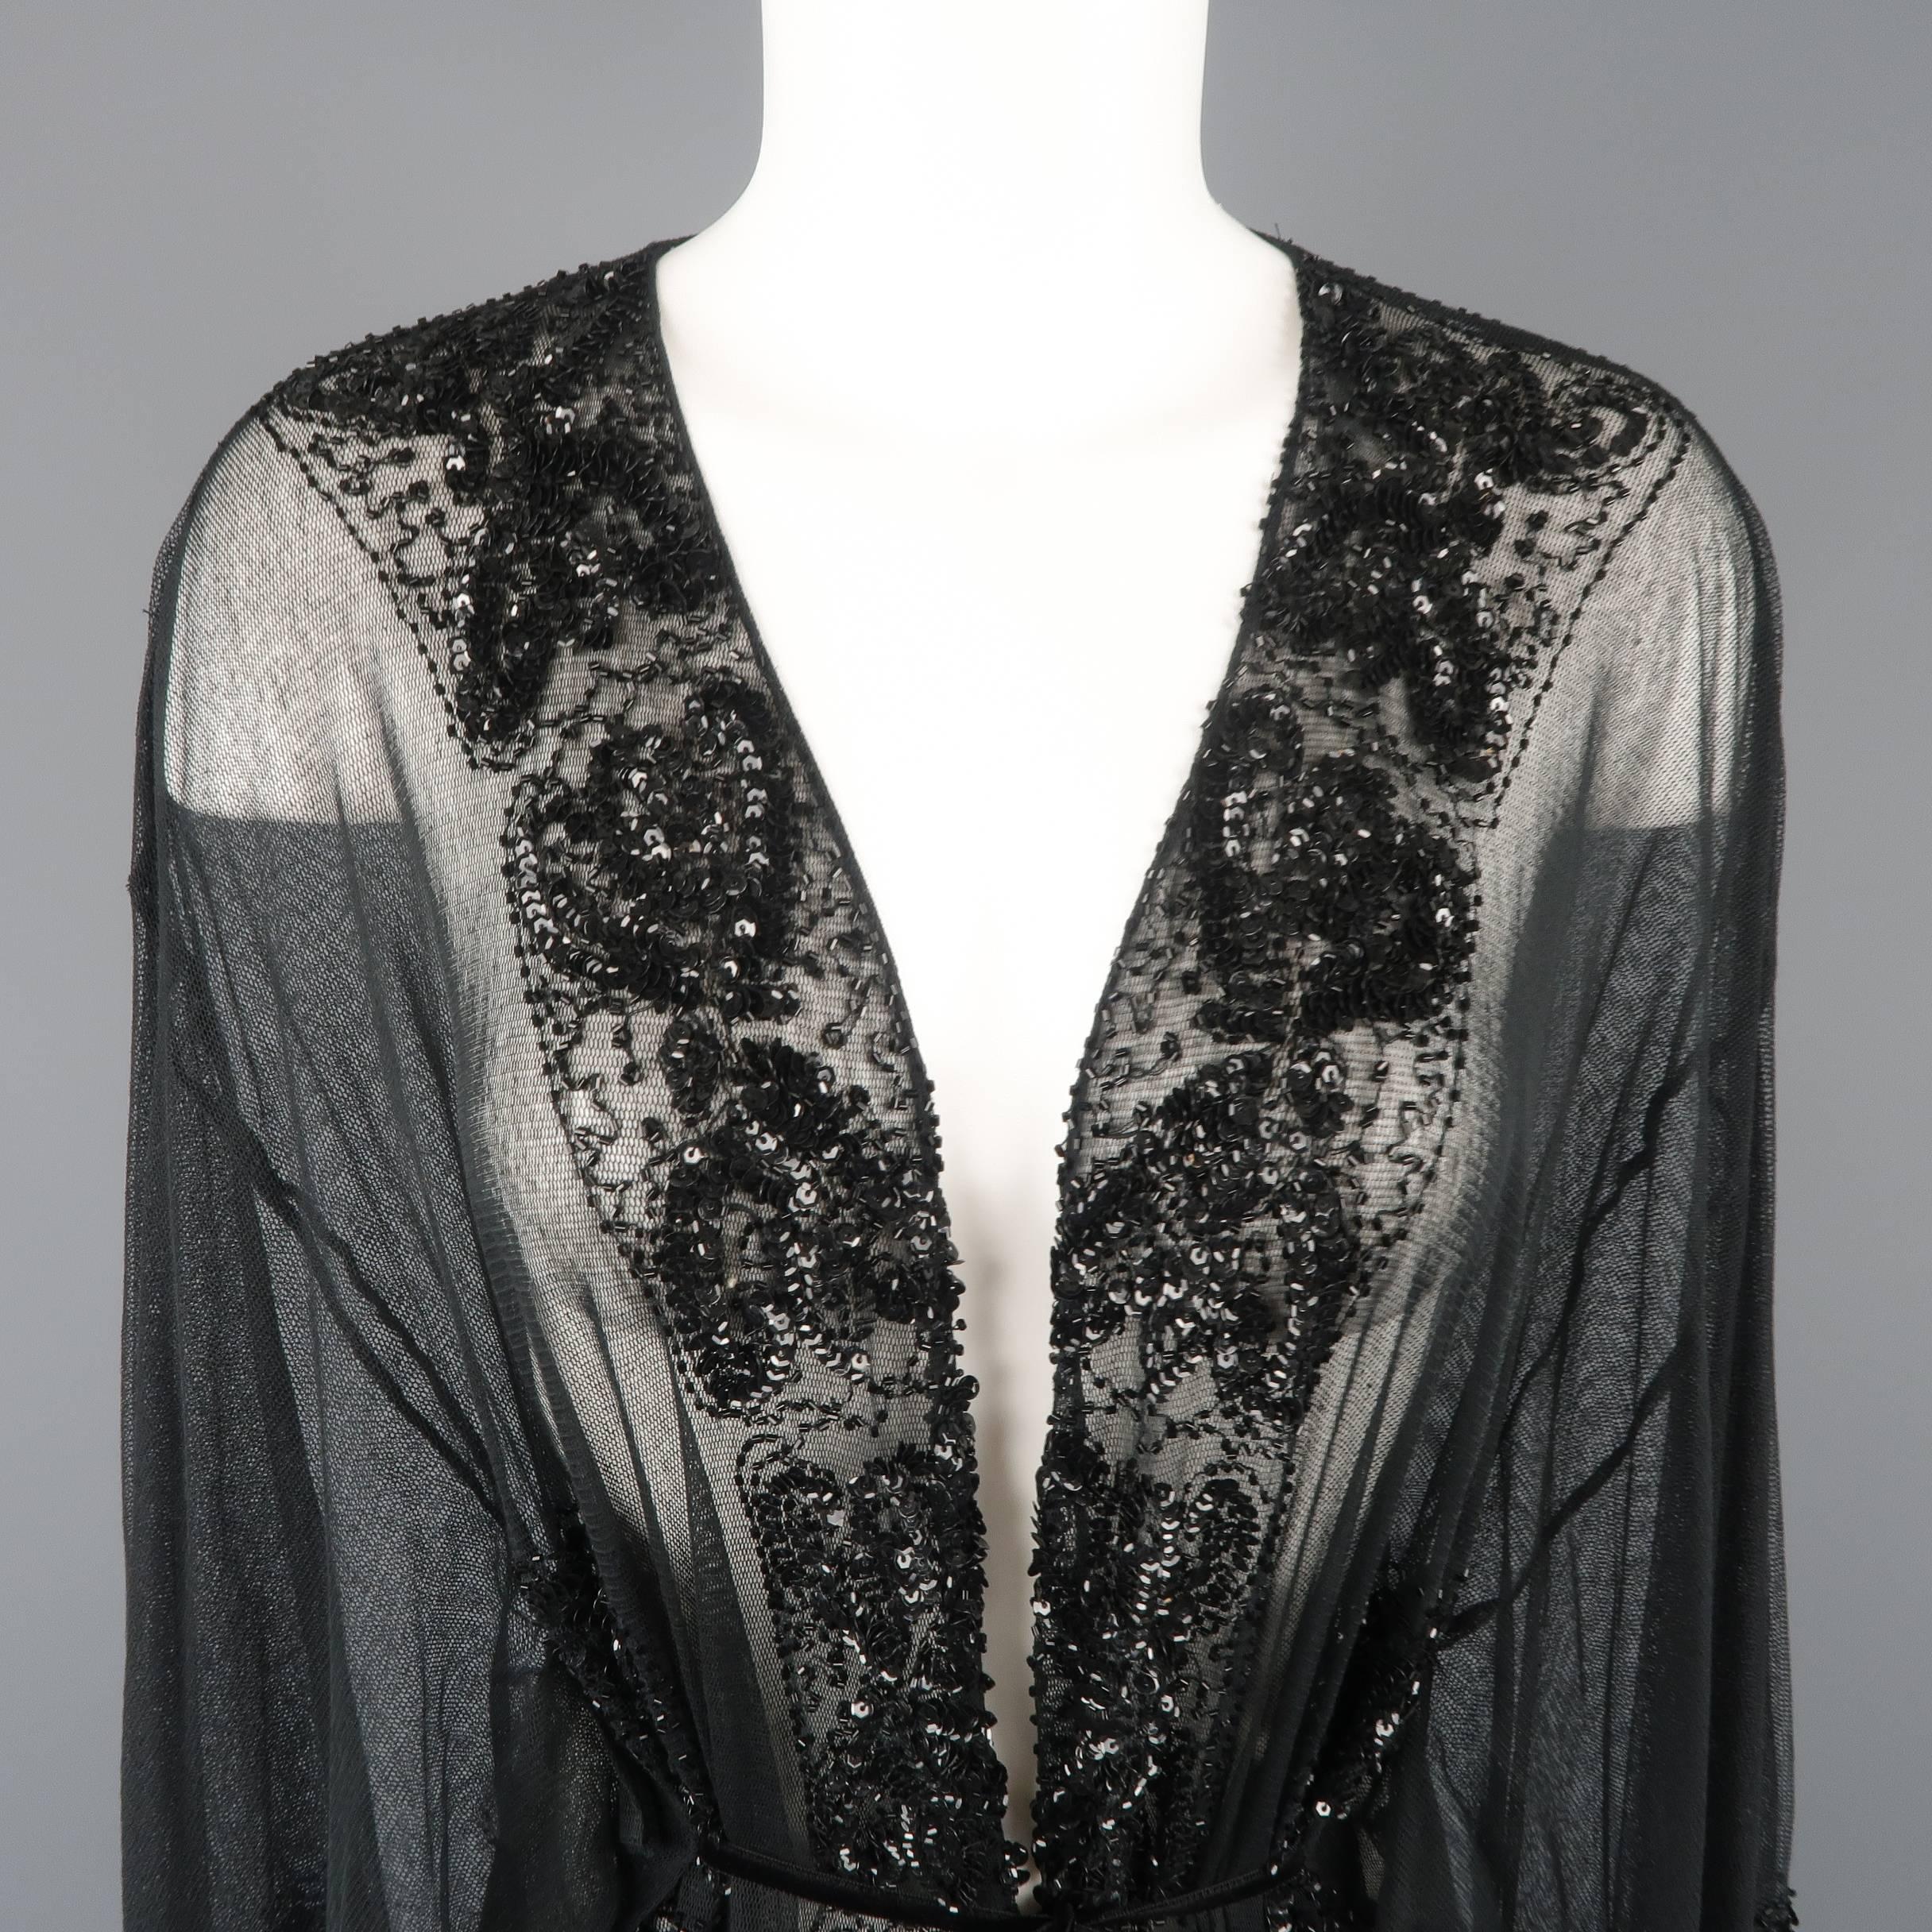 This gorgeous kimono style cardigan by COLLETTE DINNIGAN comes in soft black micro mesh tulle with wide sleeves, black velvet ribbon tie front, and glass and sequin beadwork throughout. Made in Australia.
 
New with tag.
Marked: S
 
Measurements:
